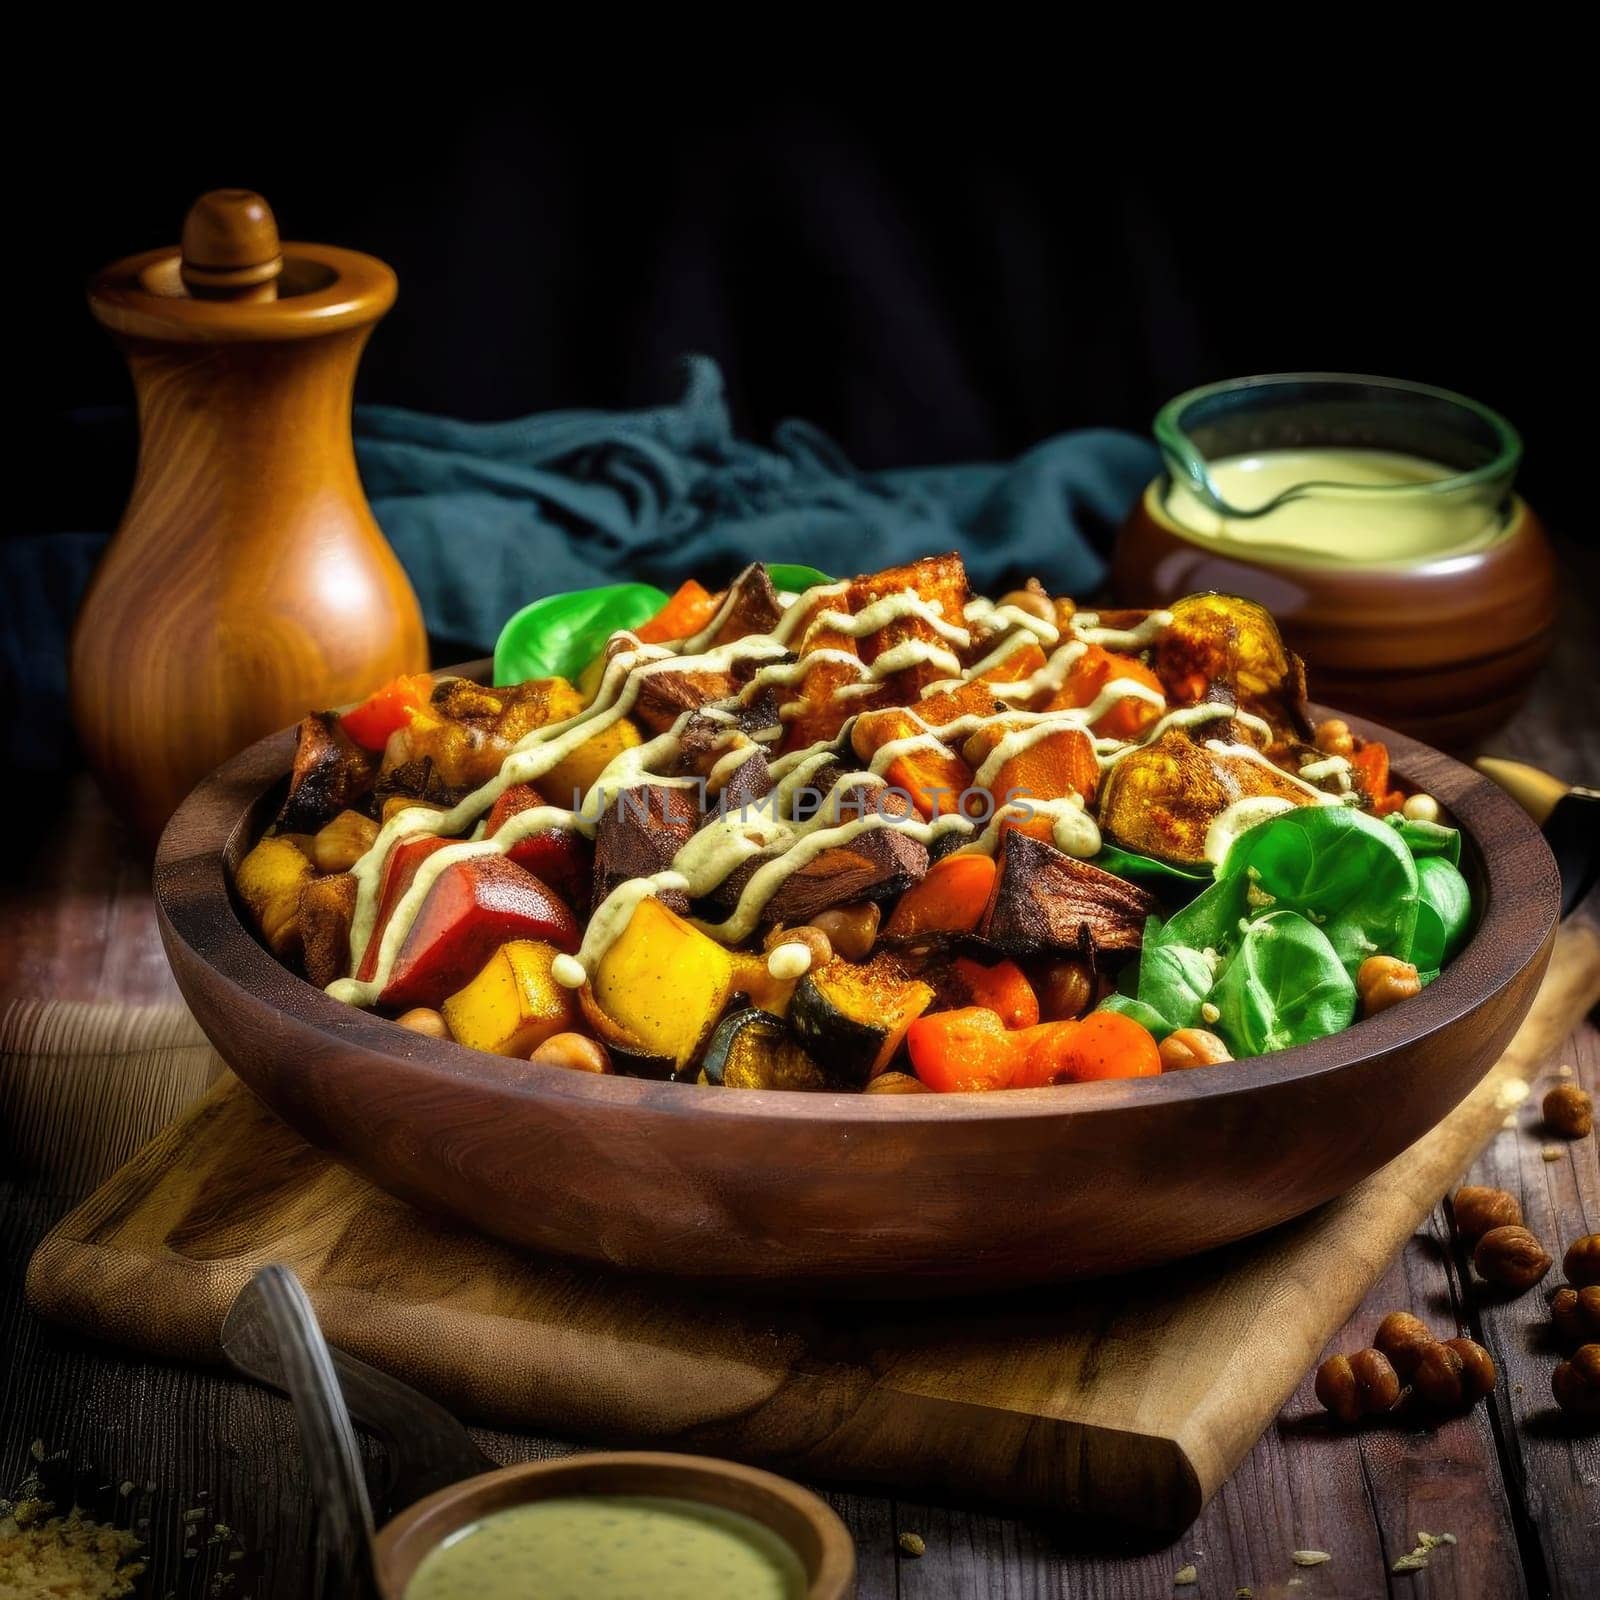 Roasted meat with vegetables in a wooden bowl on a dark background (ID: 001339)